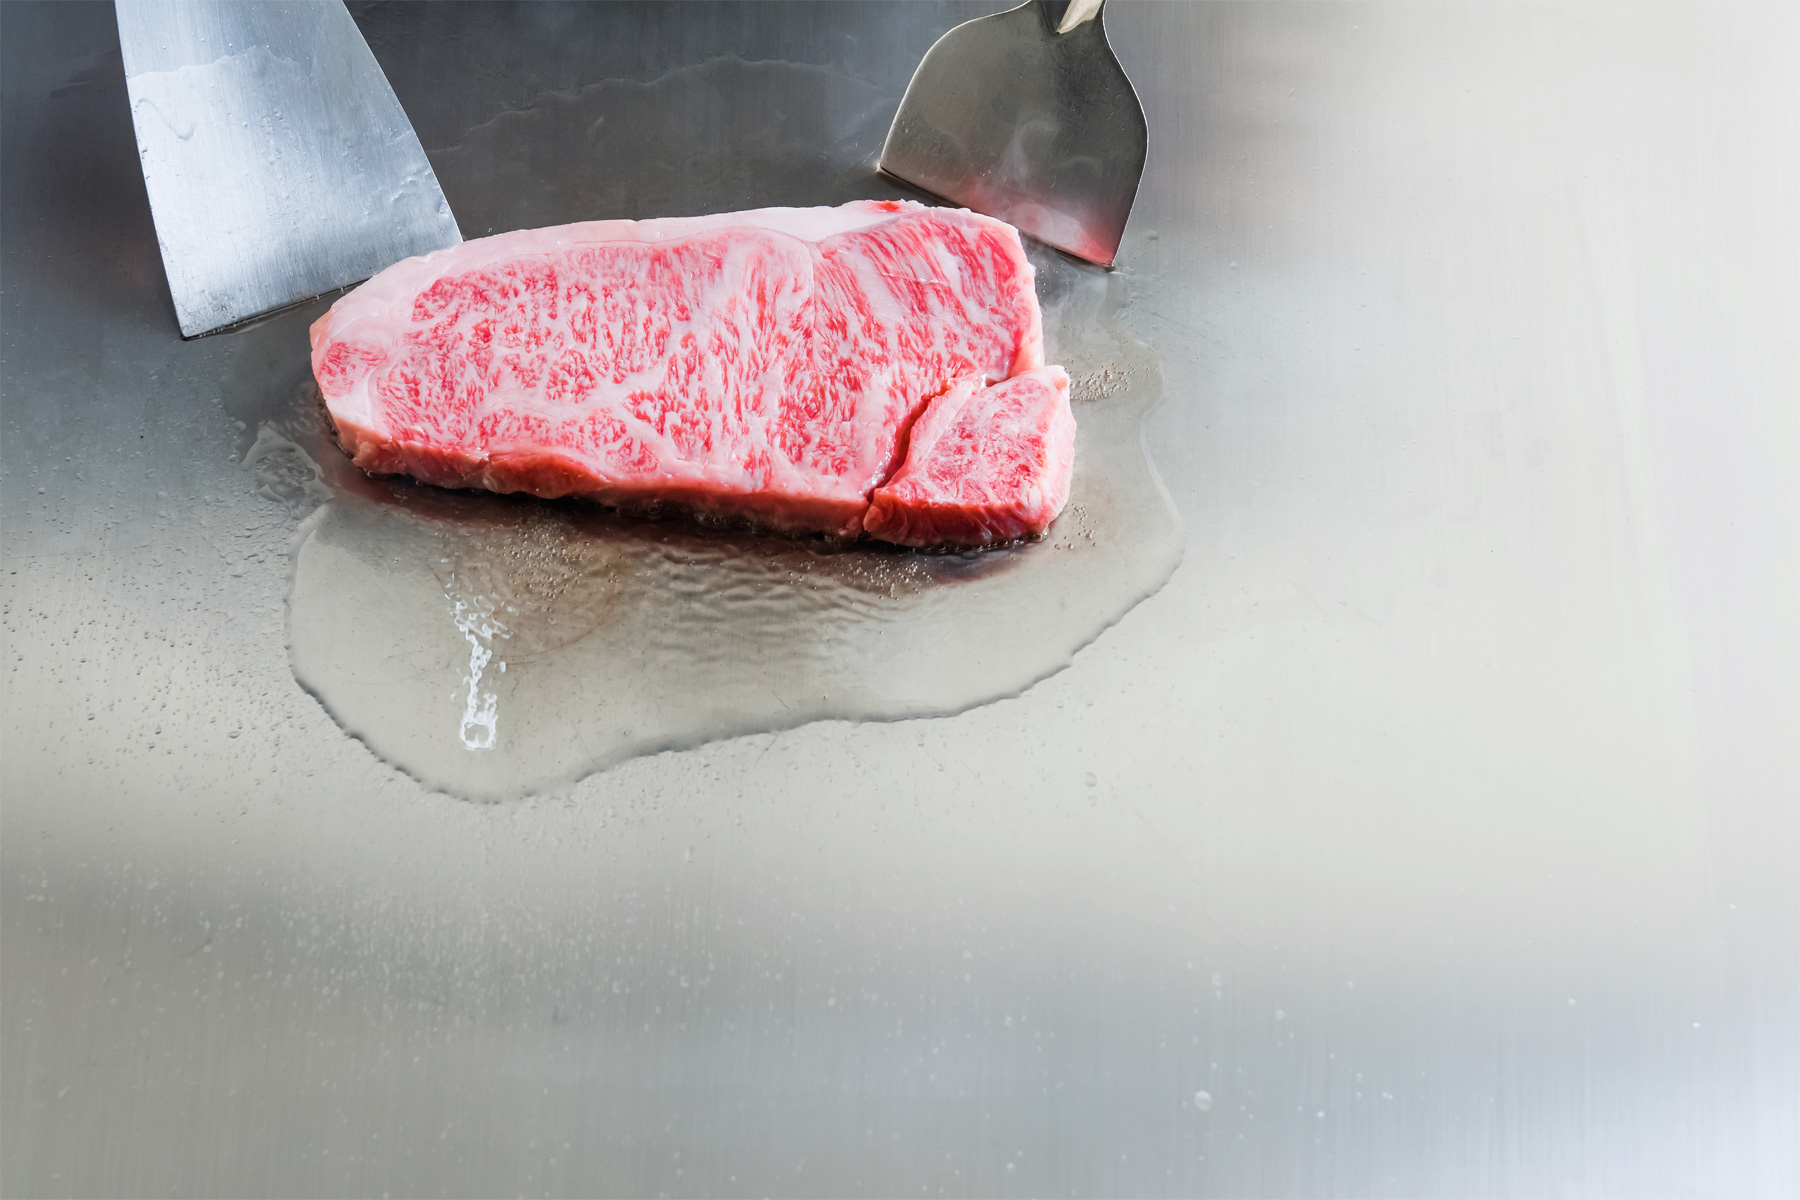 Misono has a history of over 70 years. We are connoisseurs of Kobe beef and our chefs have cultivated great tecnique and maintain the highest standards.